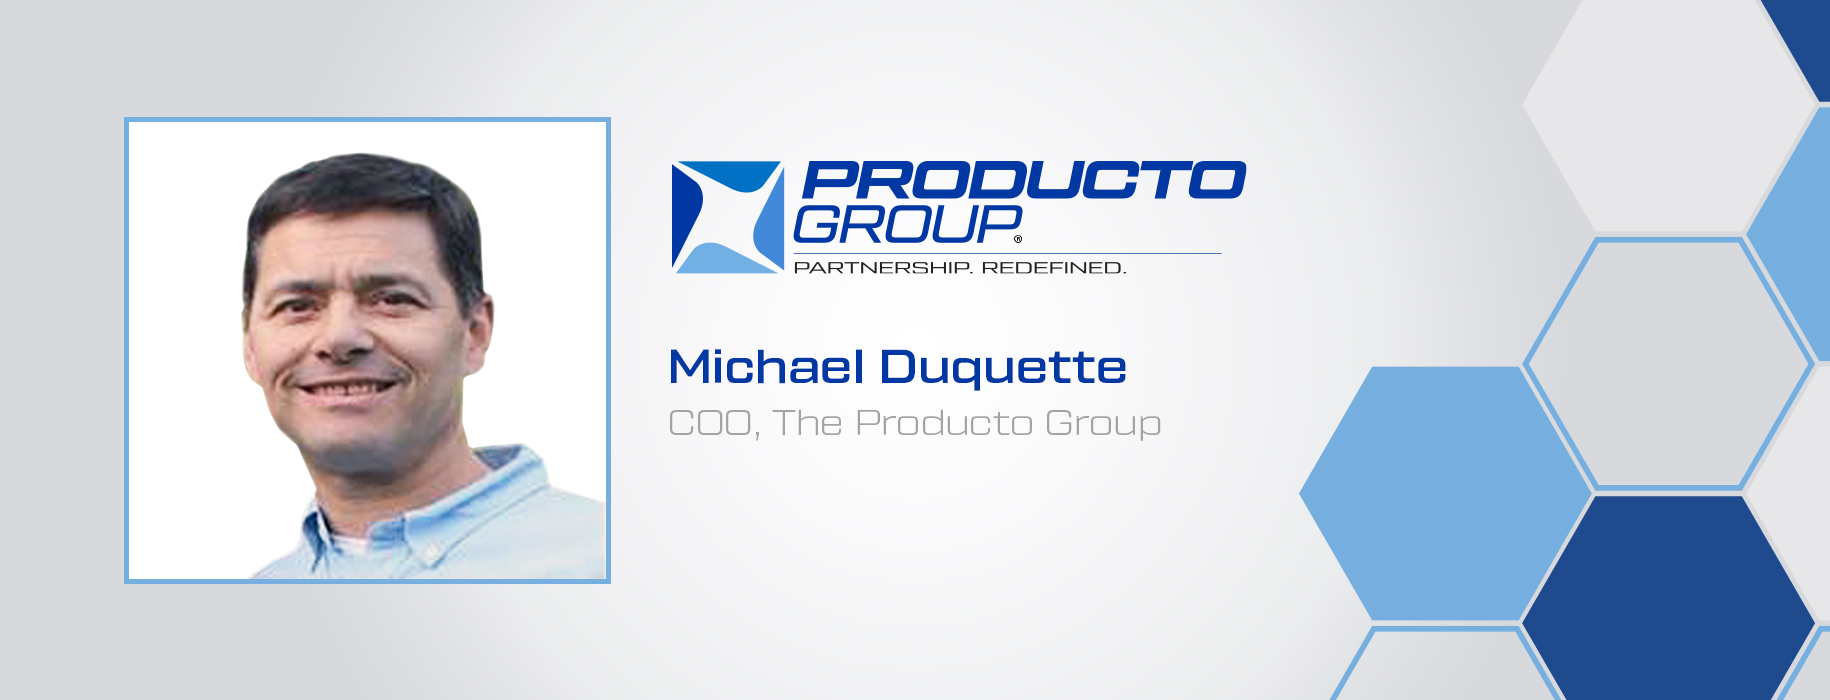 Mike Duquette Appointed COO